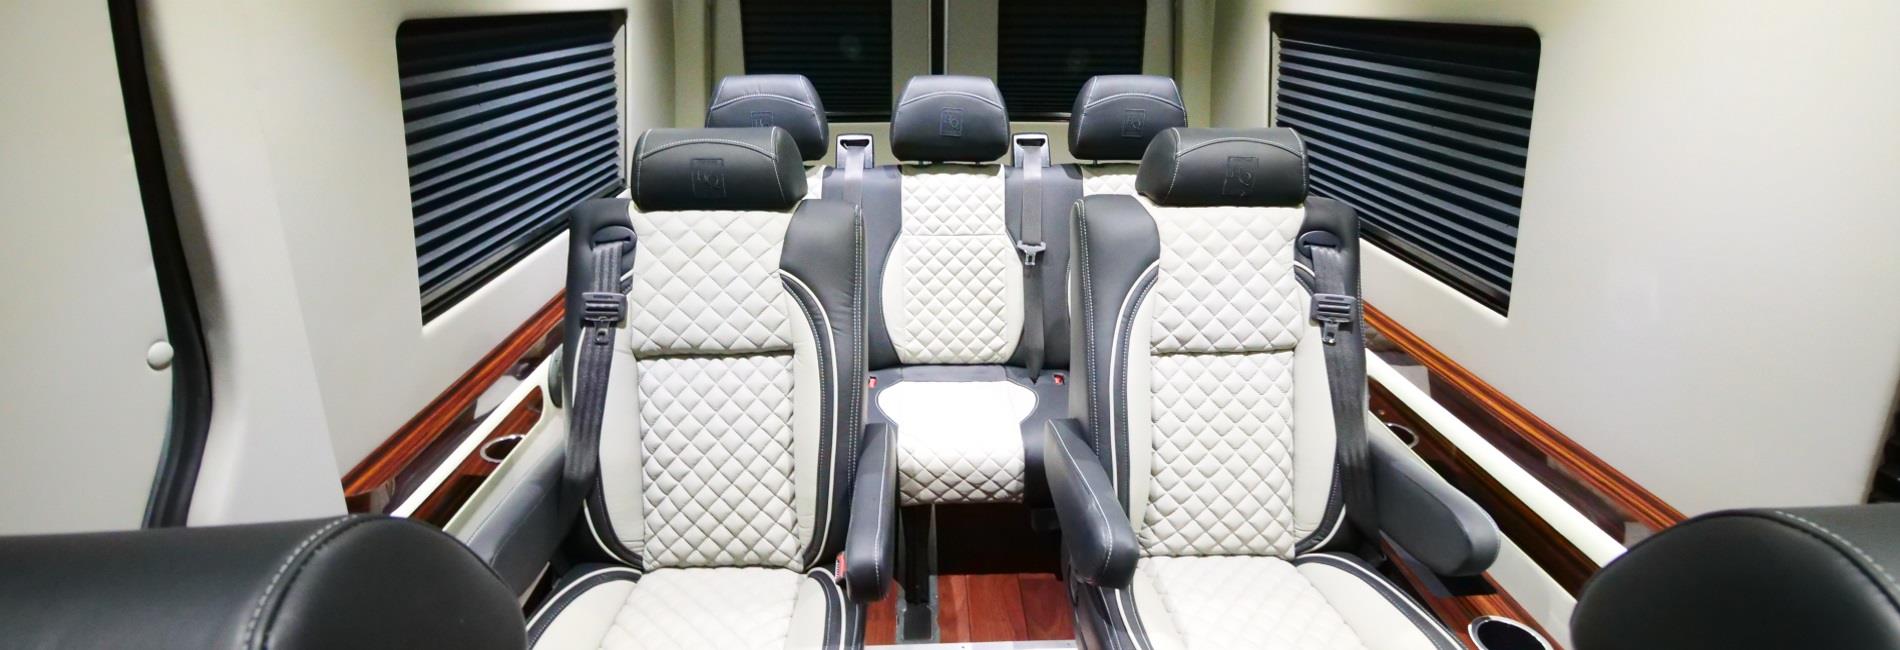 A spacious smart environment suitable for business meetings and family road trips alike.